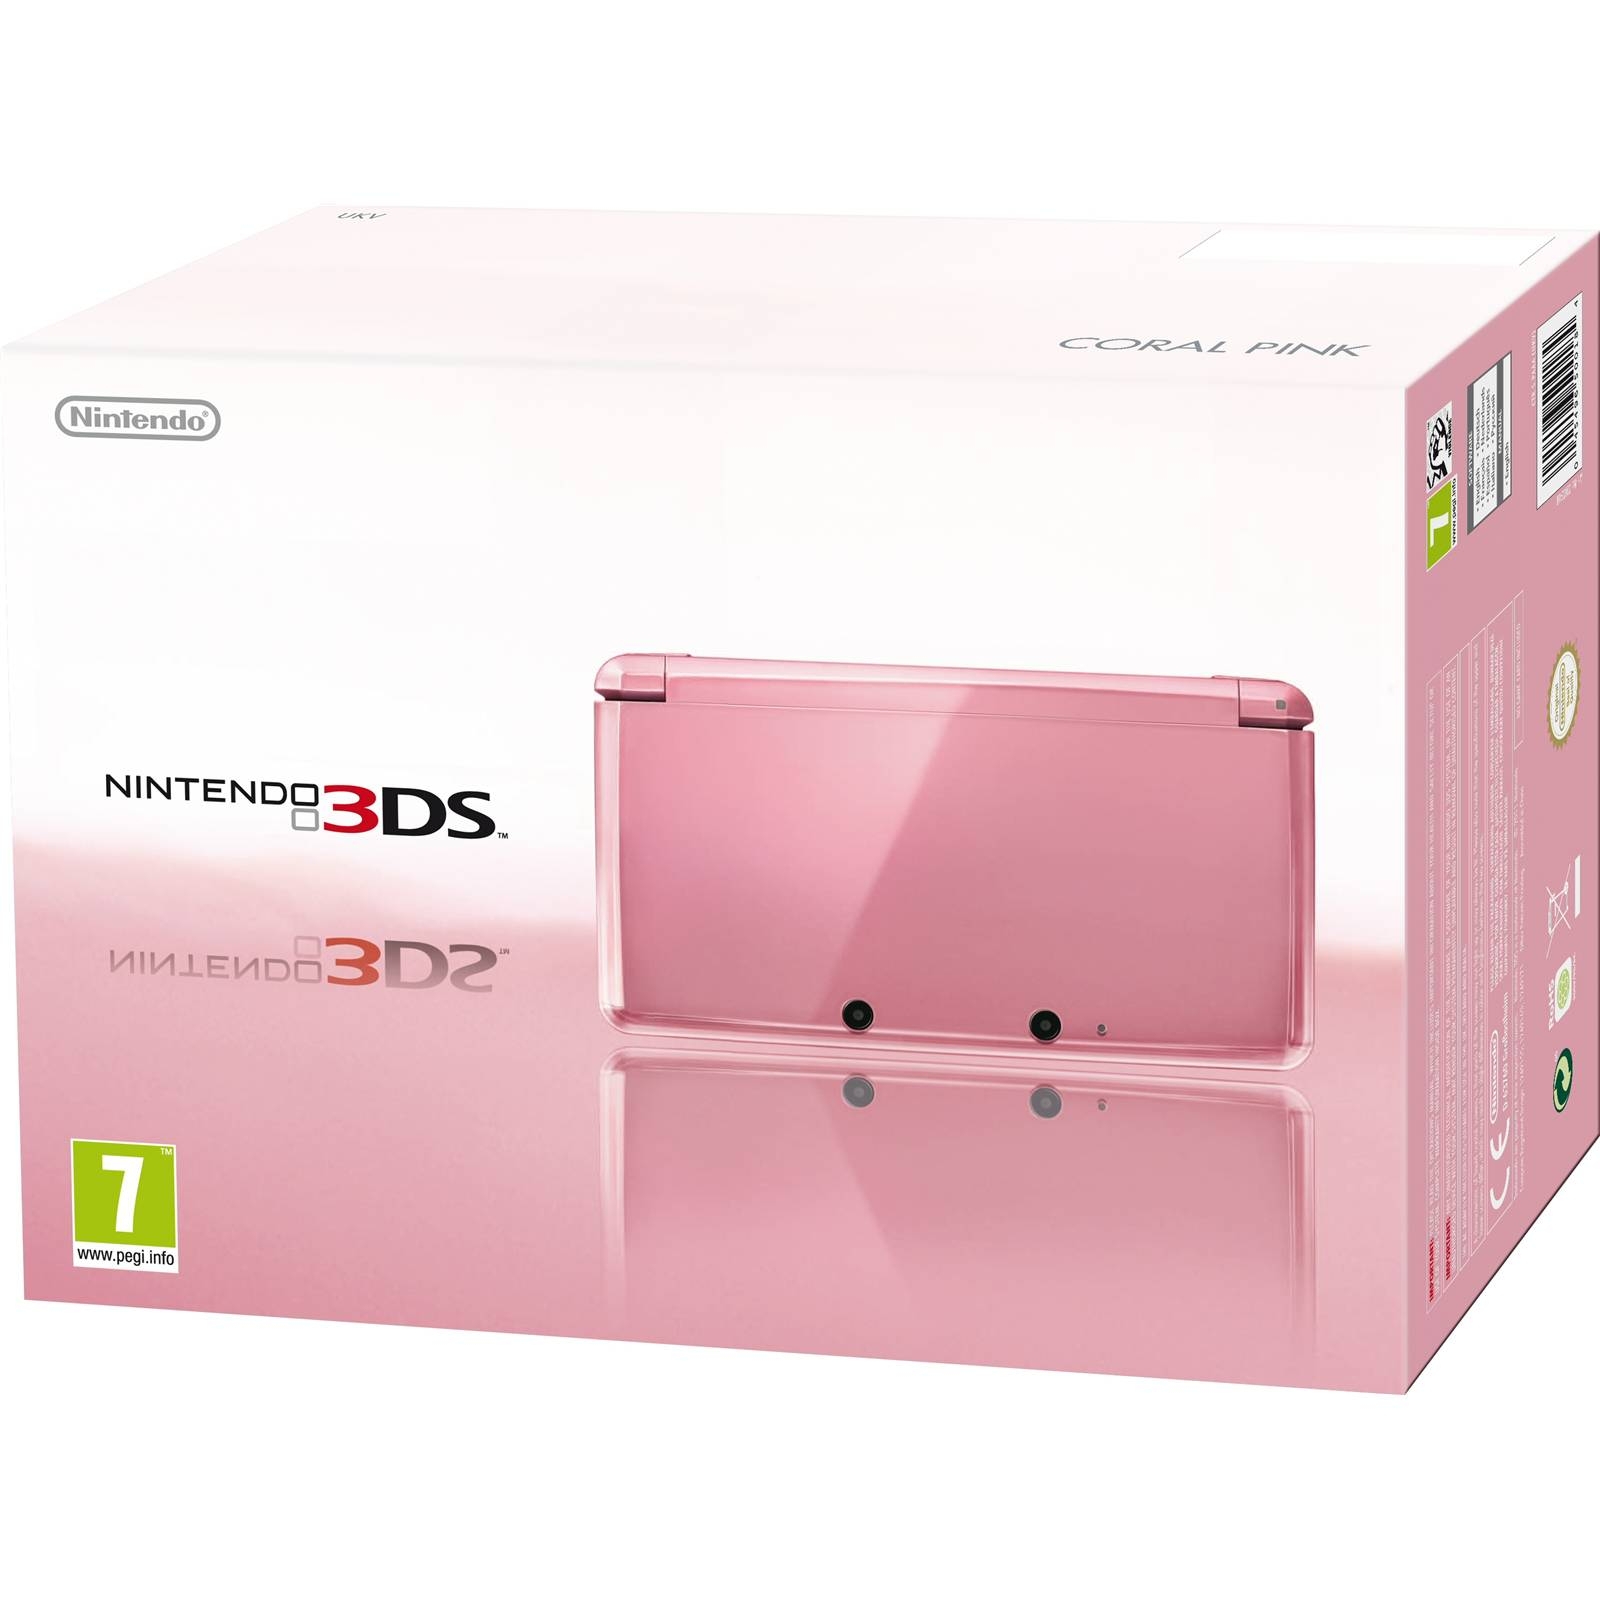 nintendo-3ds-console-coral-pink-euro.jpg